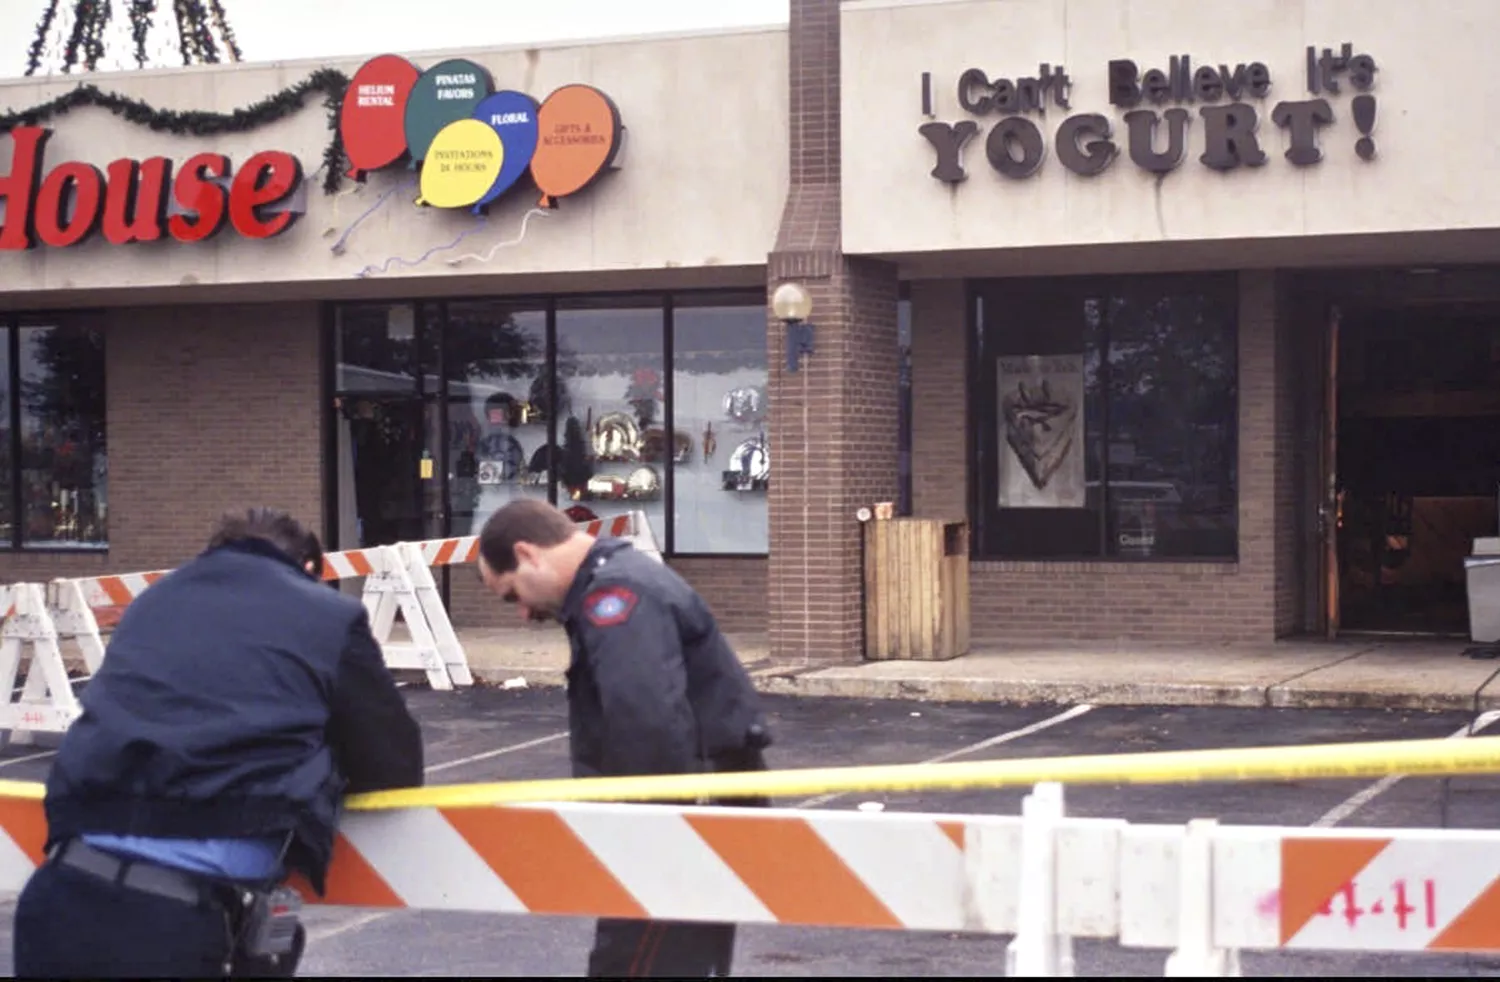 Officers at the scene of the Yogurt Shop murders.